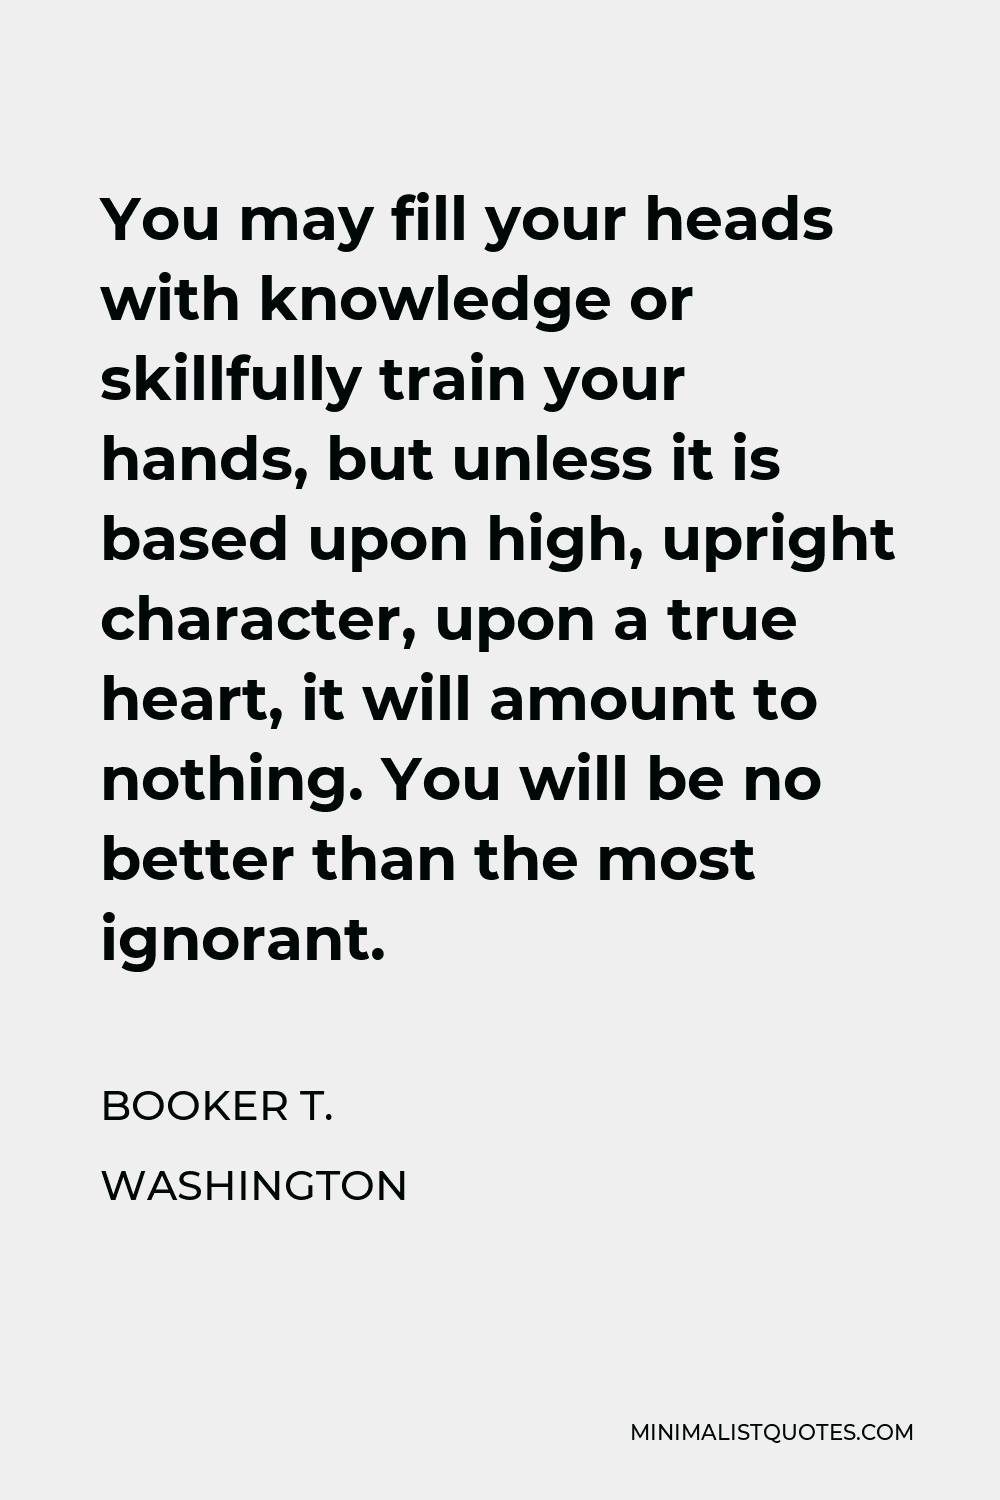 Booker T. Washington Quote - You may fill your heads with knowledge or skillfully train your hands, but unless it is based upon high, upright character, upon a true heart, it will amount to nothing. You will be no better than the most ignorant.